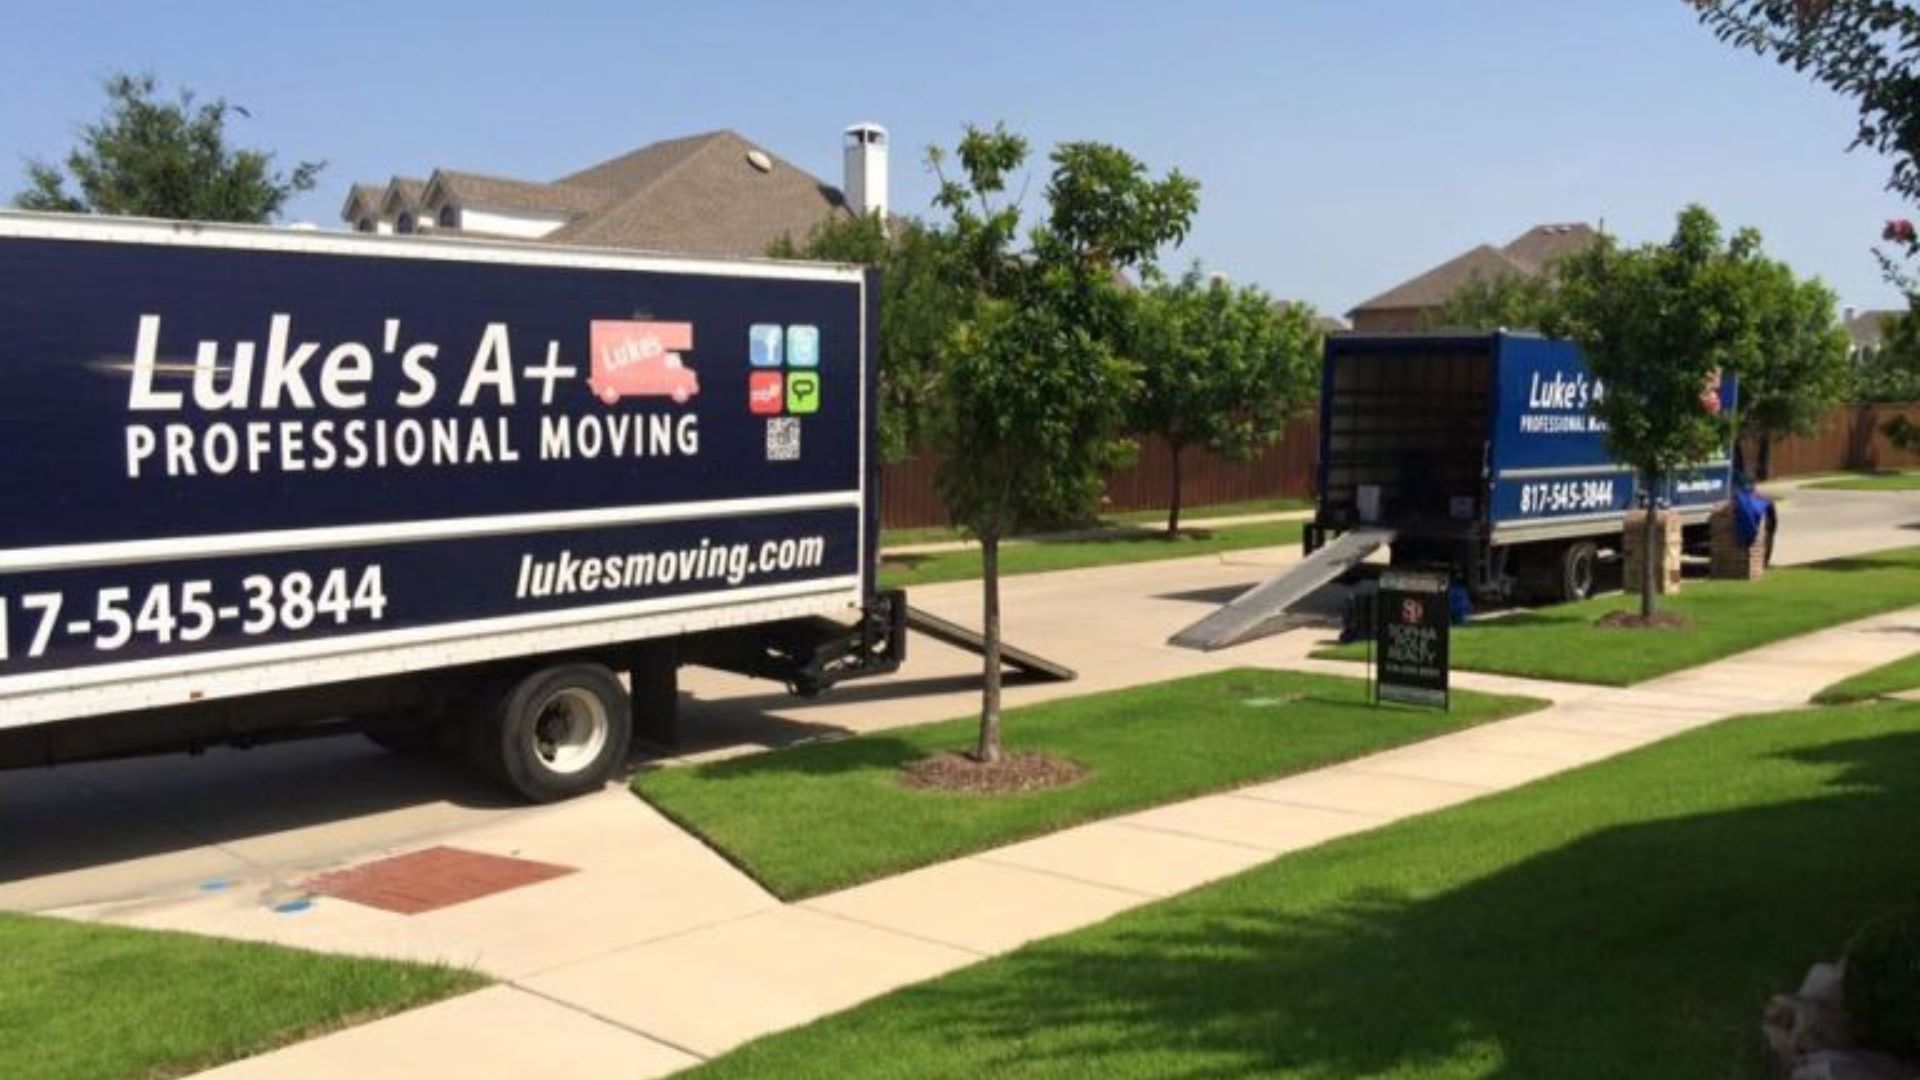 lukes a + moving services moving trucks